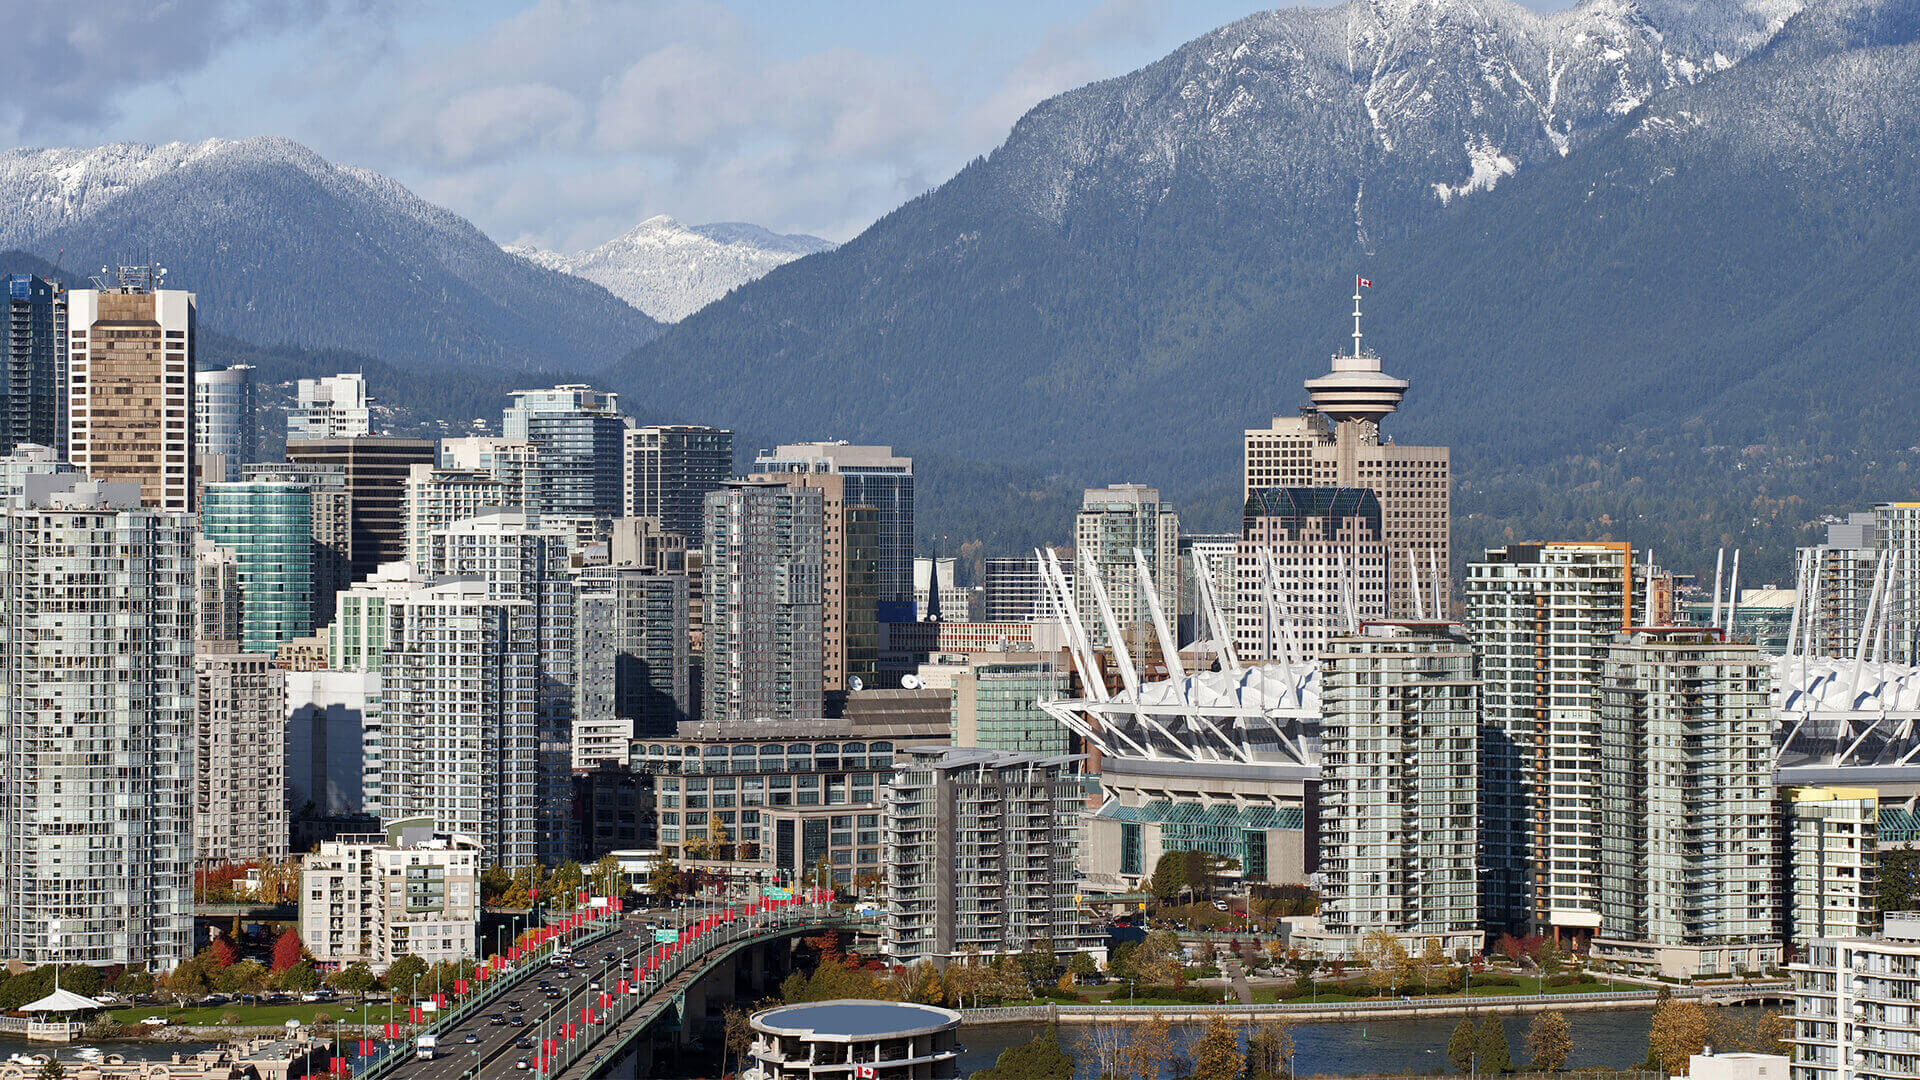 A panoramic view of Vancouver's modern skyline, with the iconic Harbour Centre and snow-capped mountains in the background.